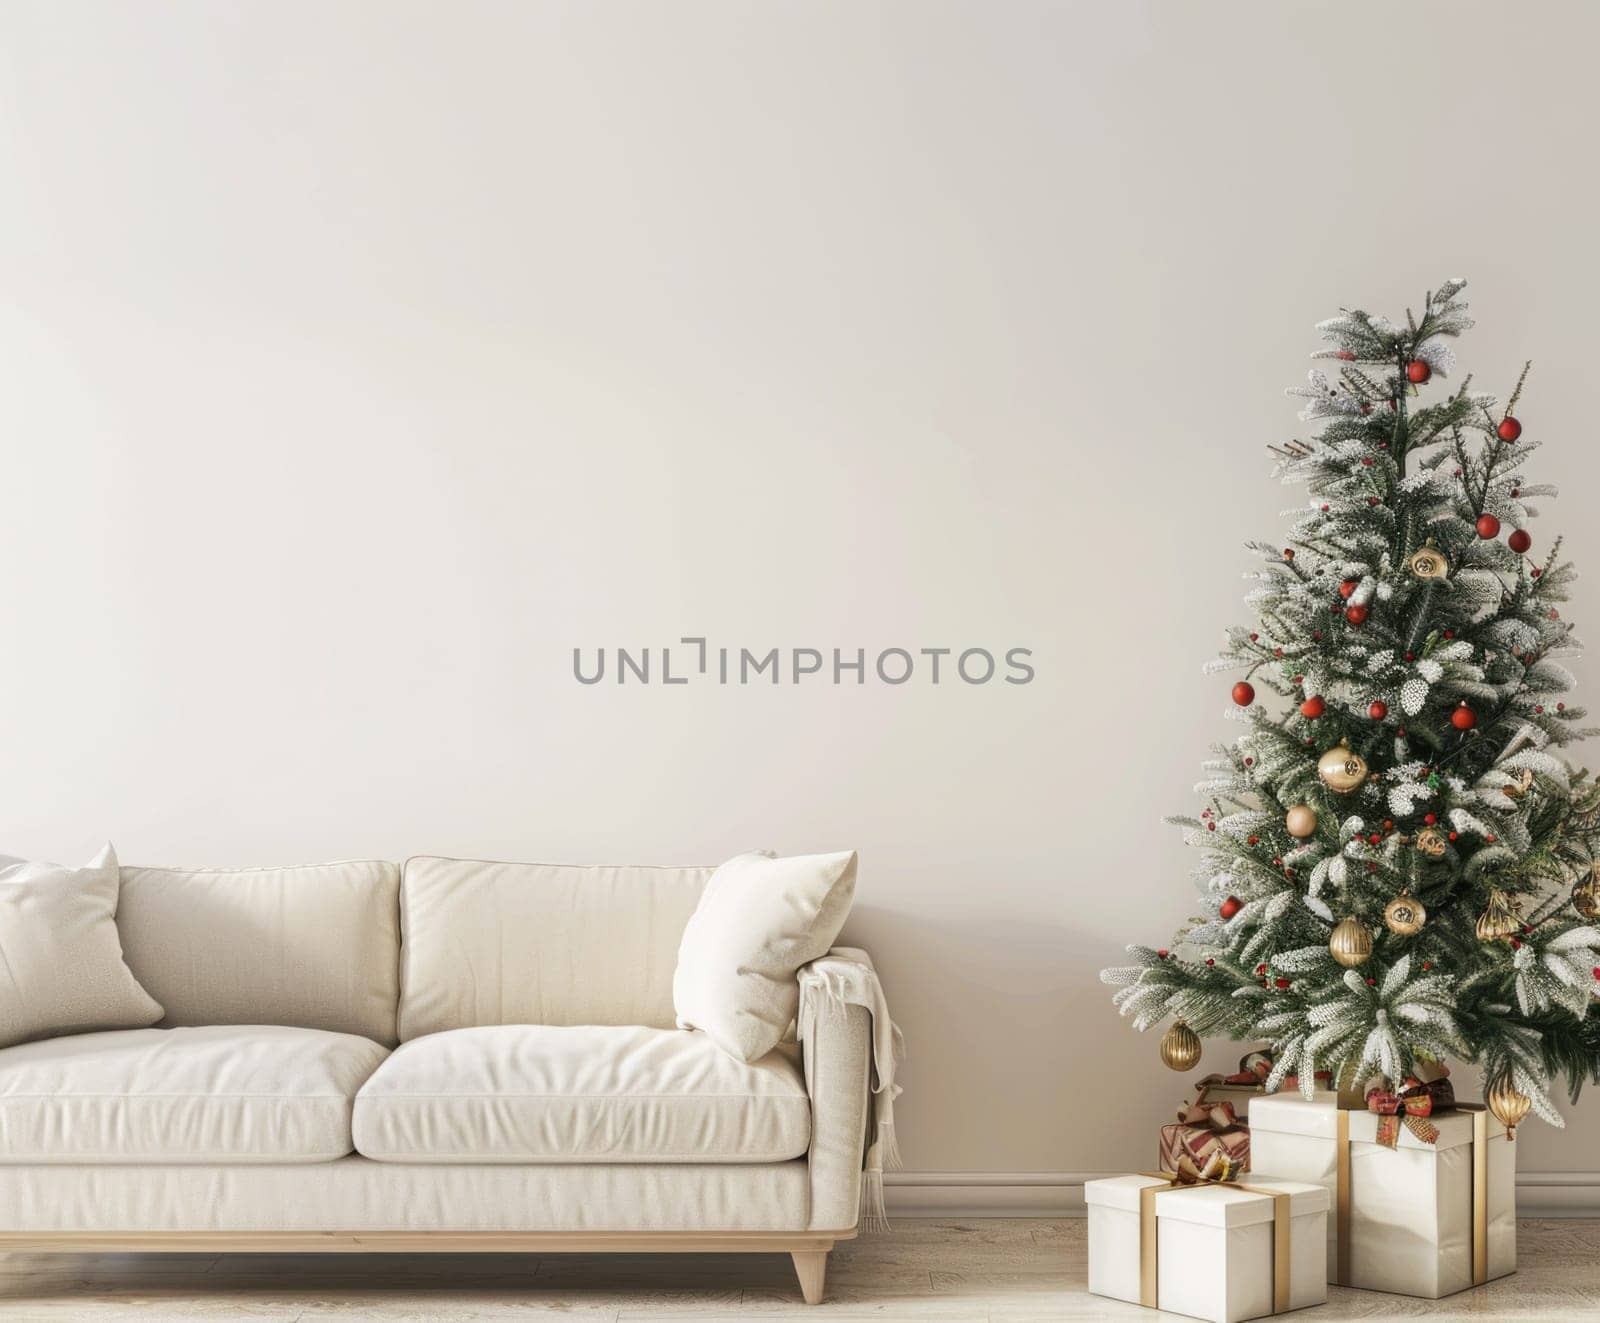 Christmas tree and white couch in elegant living room with copy space for holiday decor stock photo